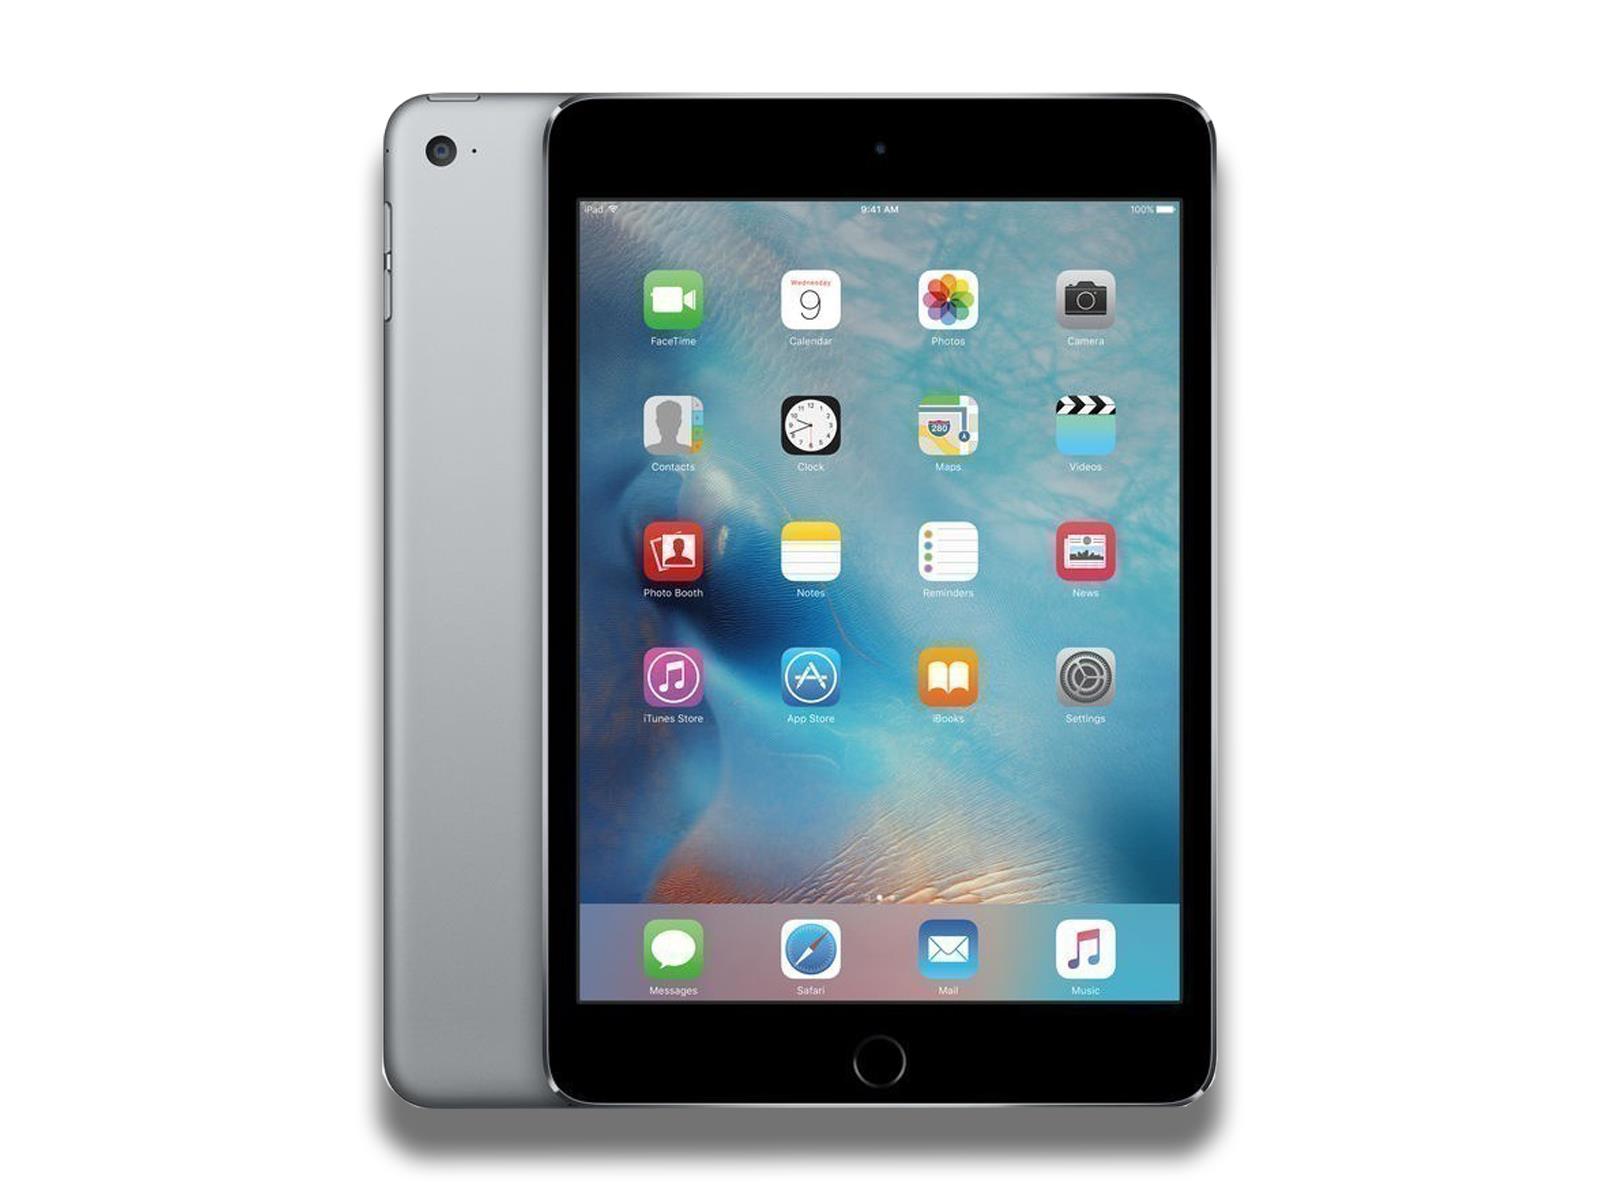 Image shows a front and rear view of the Space Grey Apple iPad Mini 4th Generation